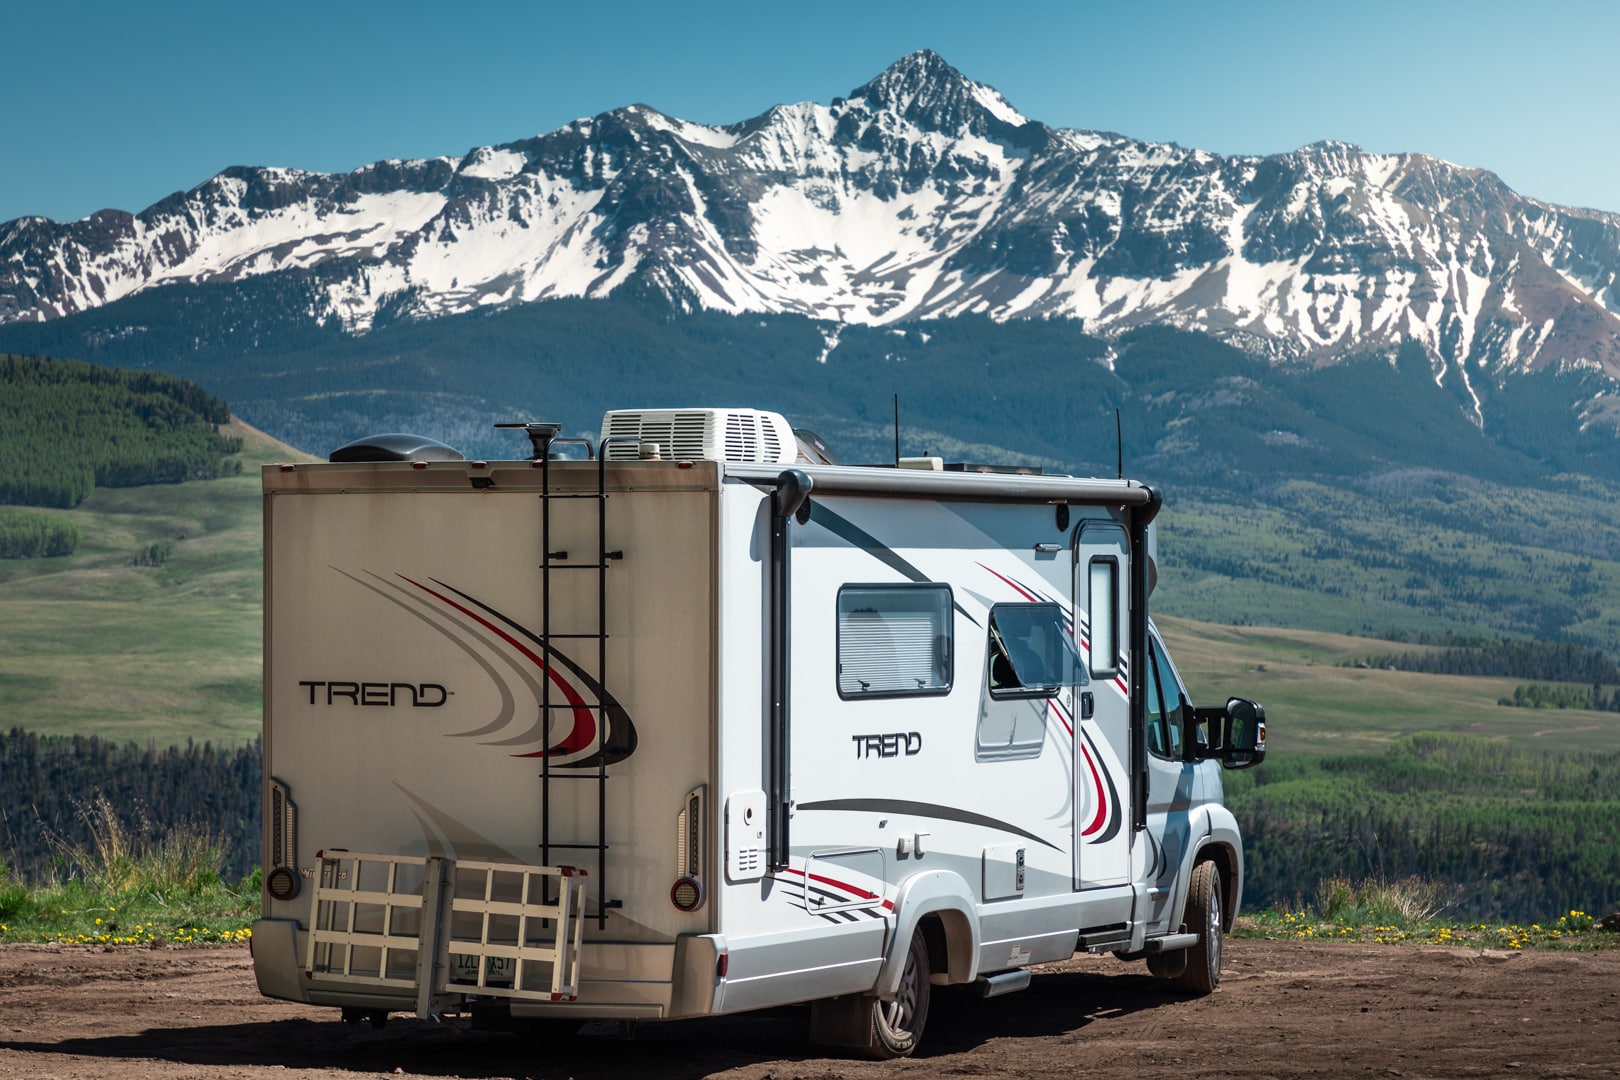 Some boondocking spots come with great views all to yourself!